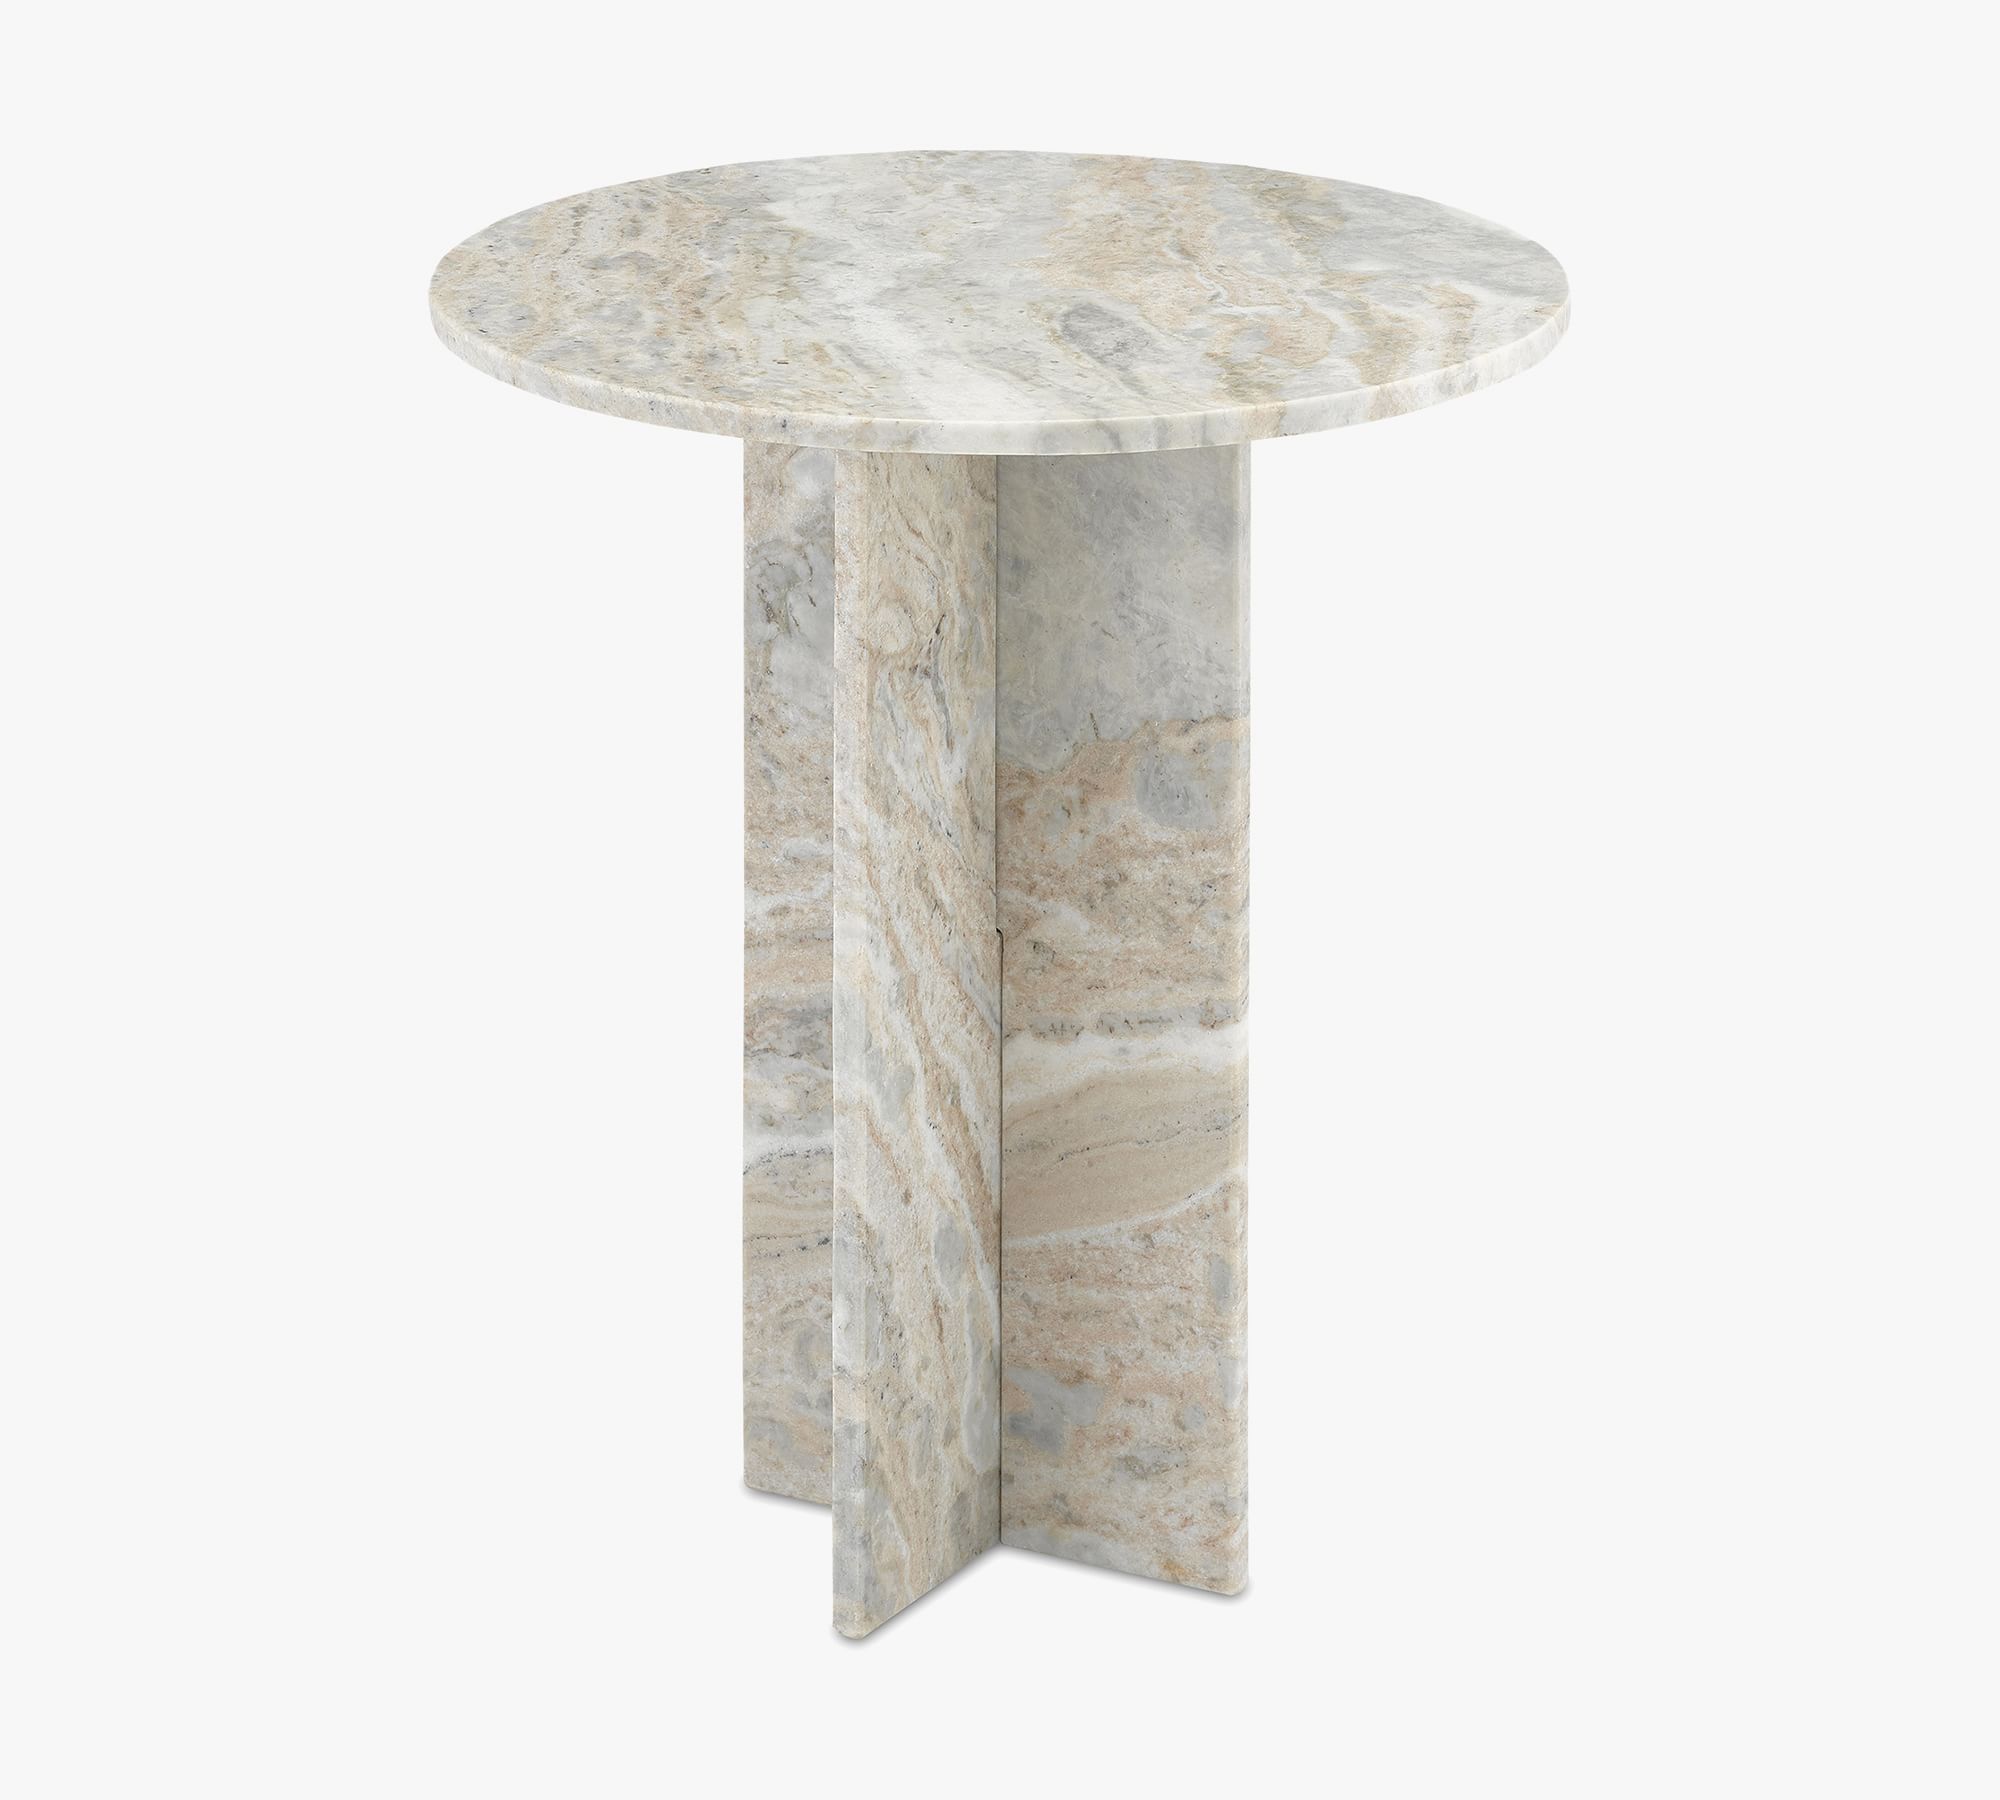 Calvert Round Marble Accent Table (18")